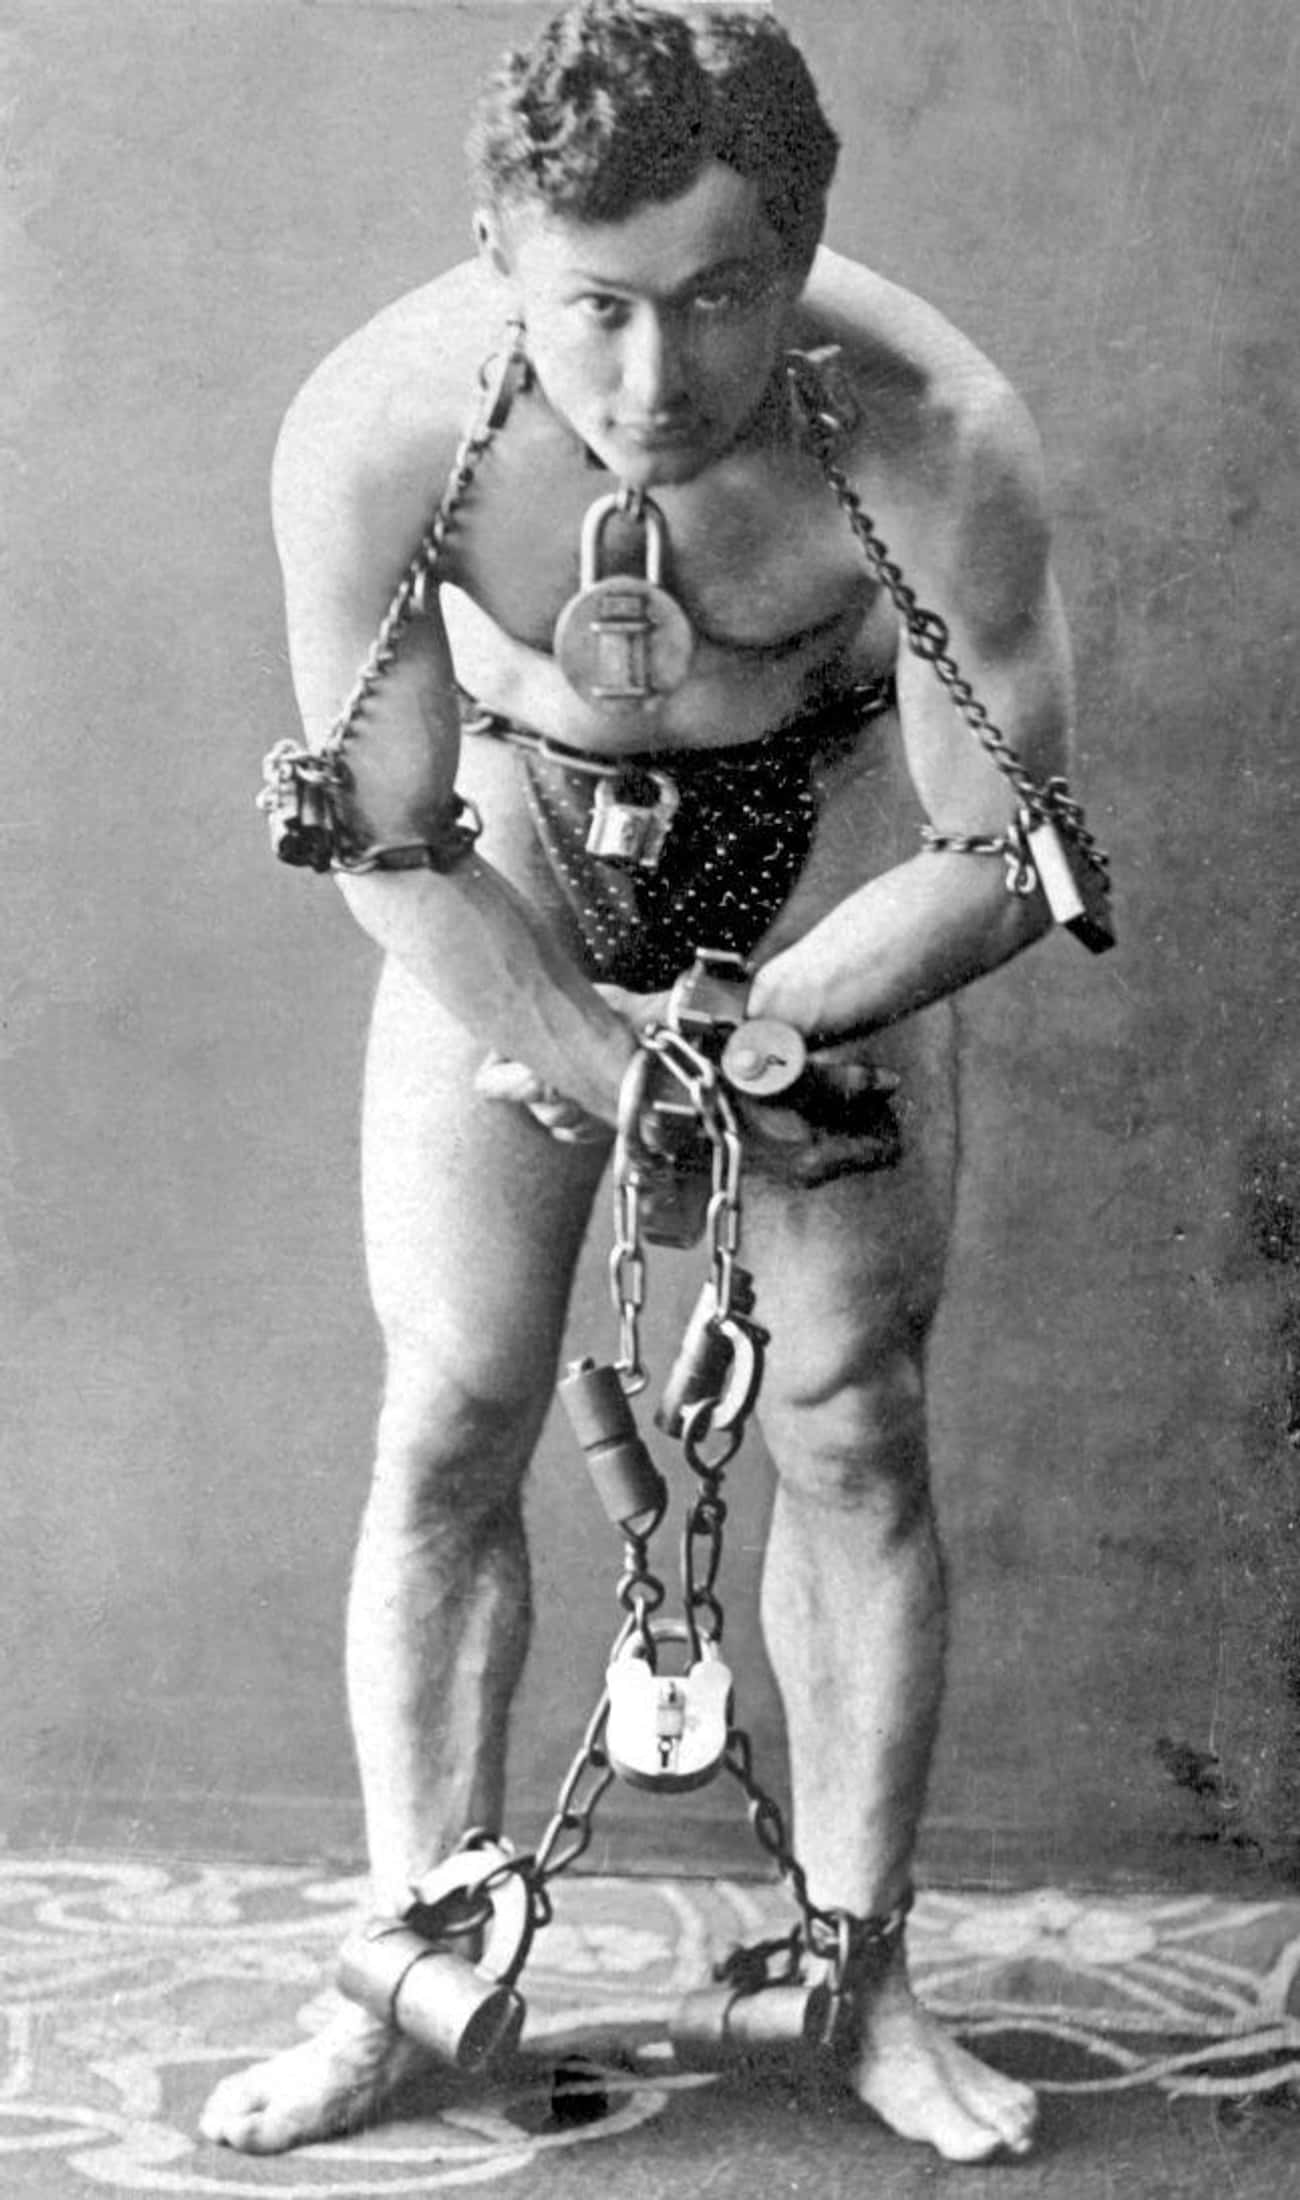 Houdini’s Training As A Magician Made Him Uniquely Suited To Recognize The Sleight-Of-Hand Tricks Used By Mediums